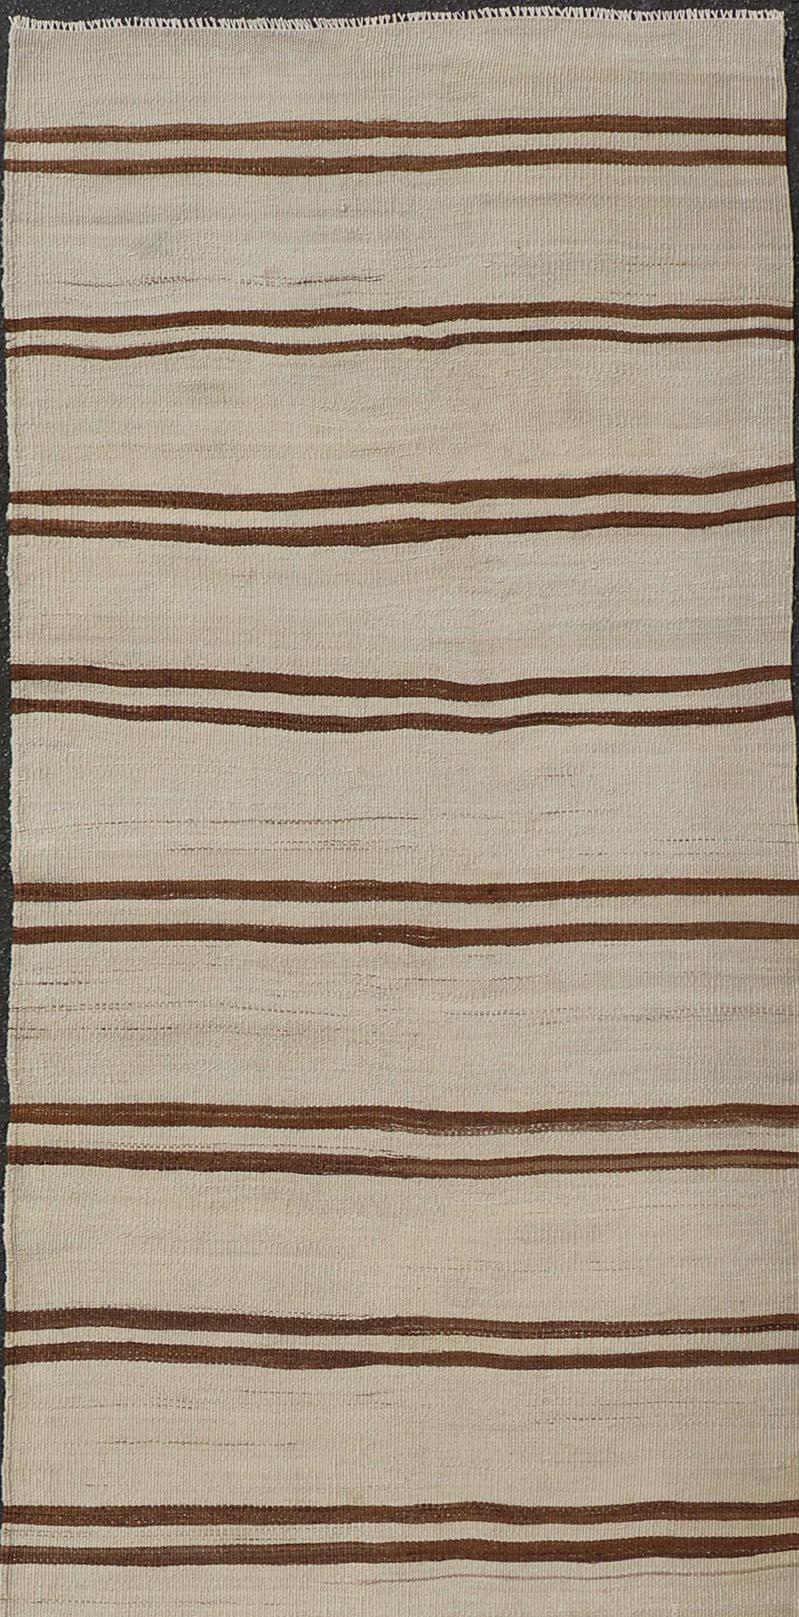 Hand-Woven Minimalist Design Vintage Kilim Runner with Stripes in Brown and Ivory For Sale